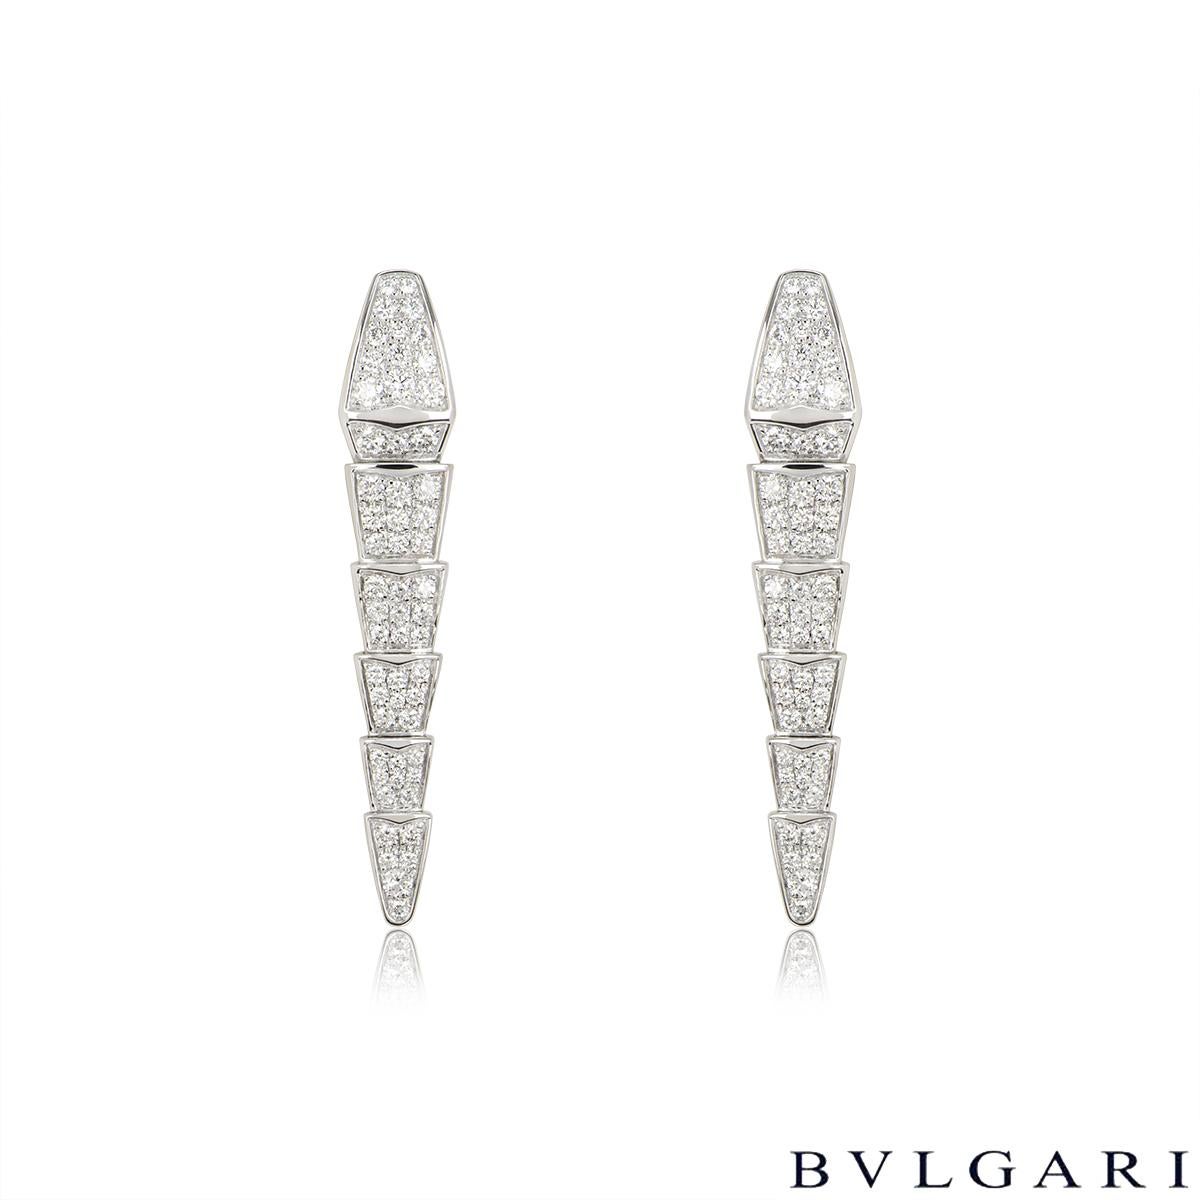 An 18k white gold pair of diamond earrings by Bvlgari from the Serpenti Viper collection. The earrings are in the shape of the iconic Bvlgari Serpenti snake, each comprising of 6 flexible, graduating pave set intersections. There are 110 round